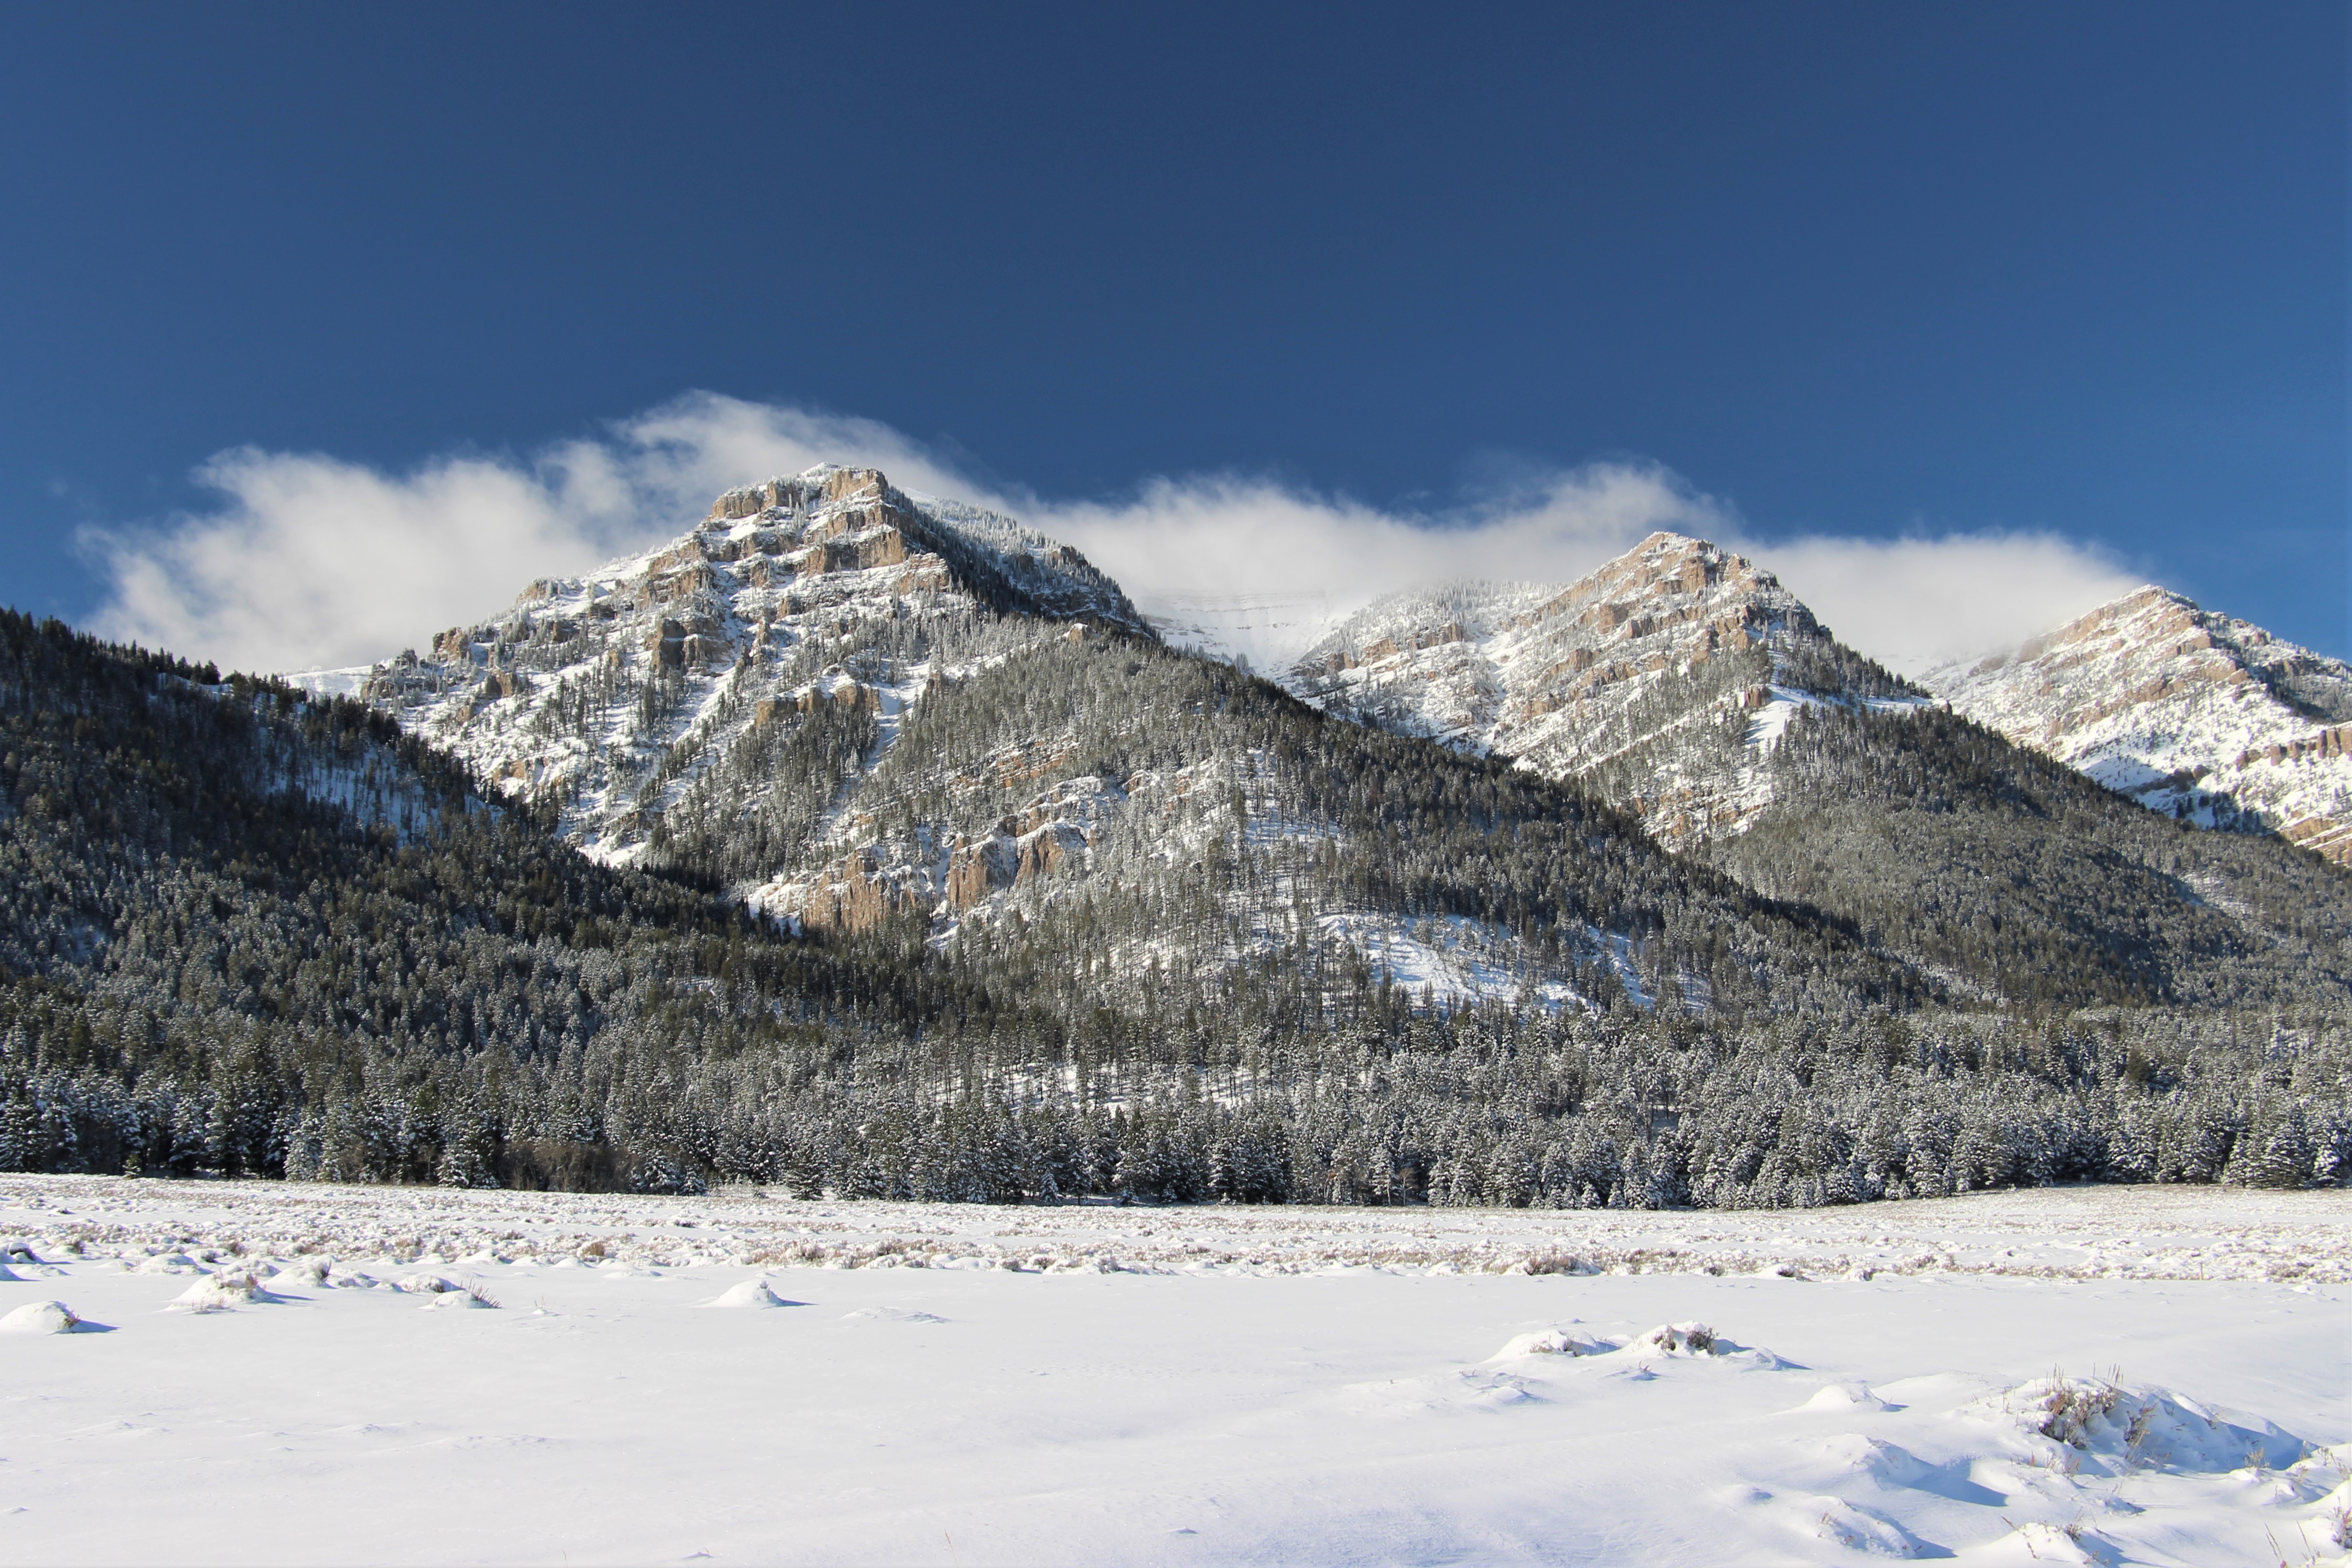 Winter's snow blankets the mountains and valley floor under bright blue skies at Red Rock Lakes National Wildlife Refuge